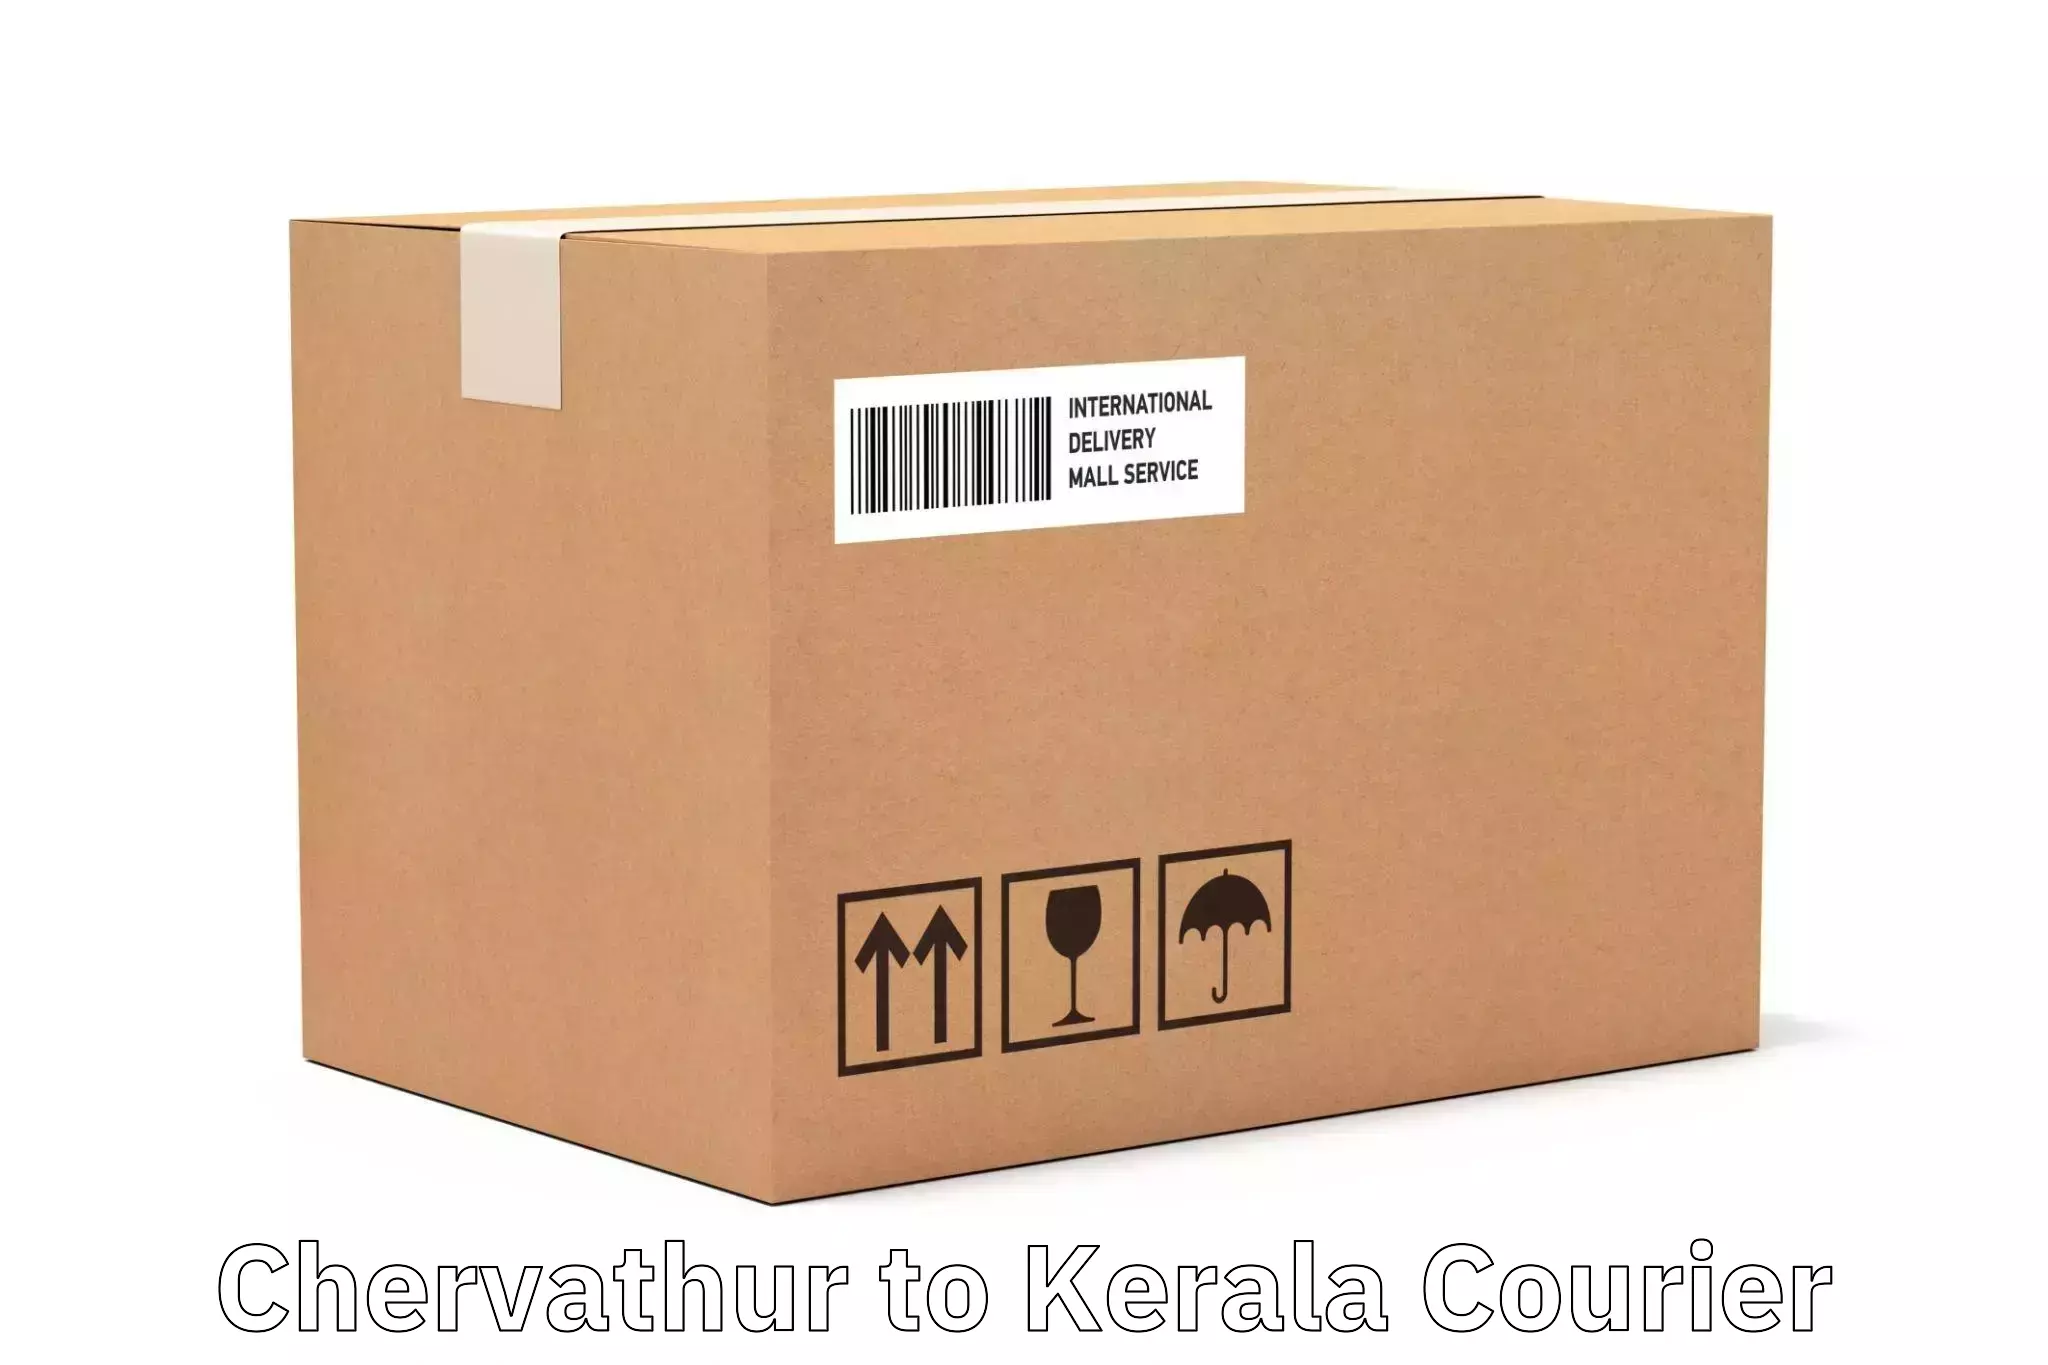 Local delivery service Chervathur to Nallepilly